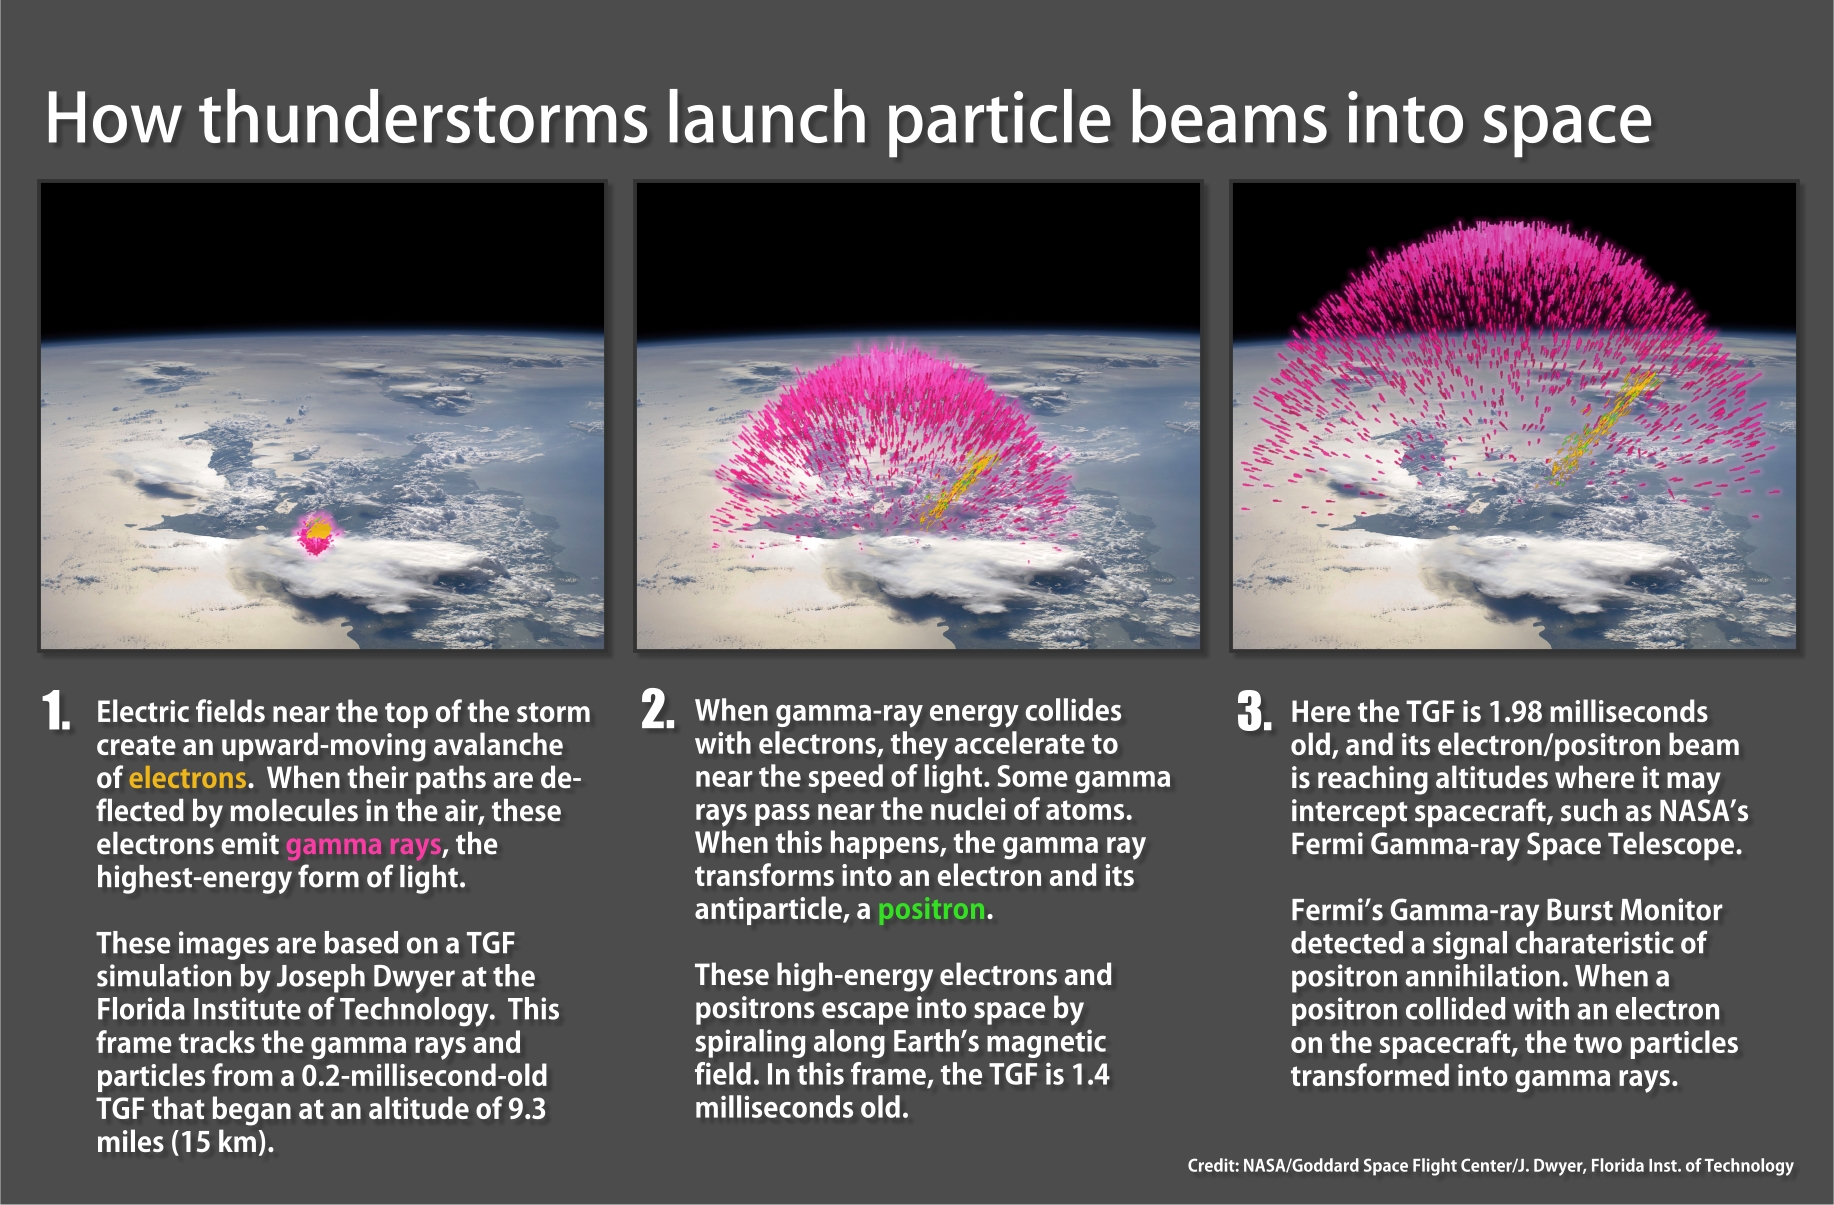 How thunderstorms launch particle beams into space